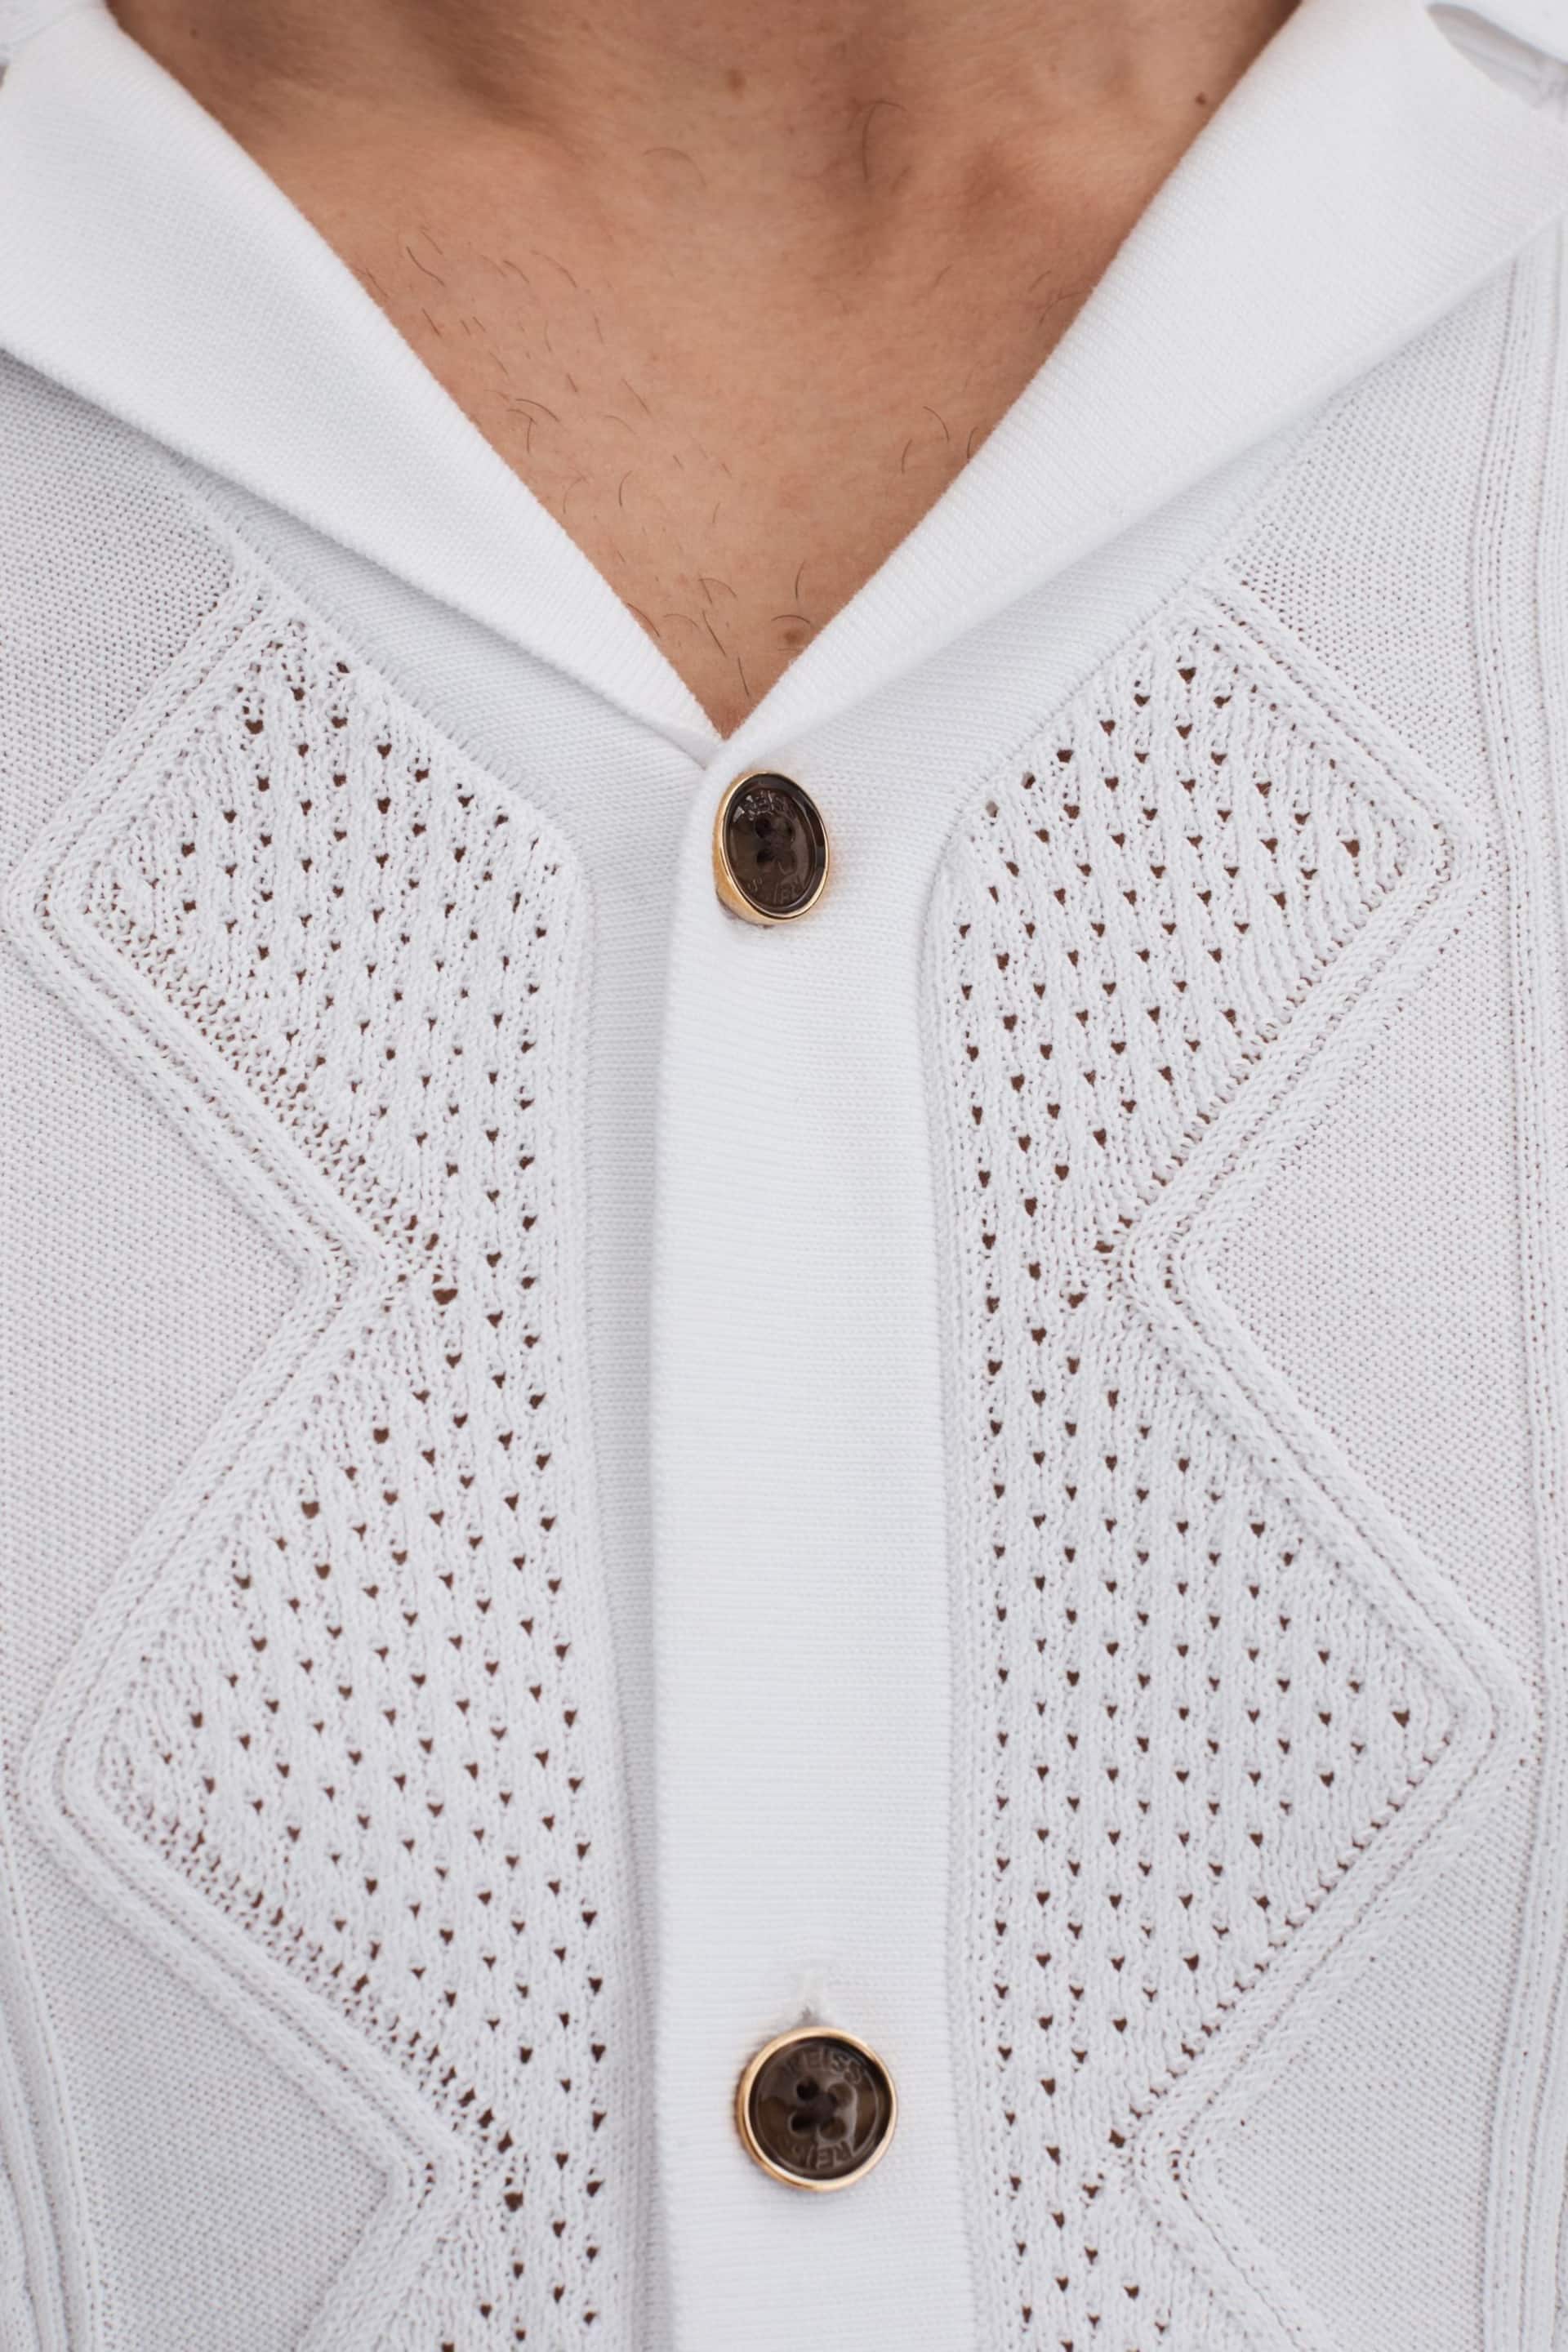 Reiss White Fortune Cable Knit Cuban Collar Shirt - Image 4 of 6